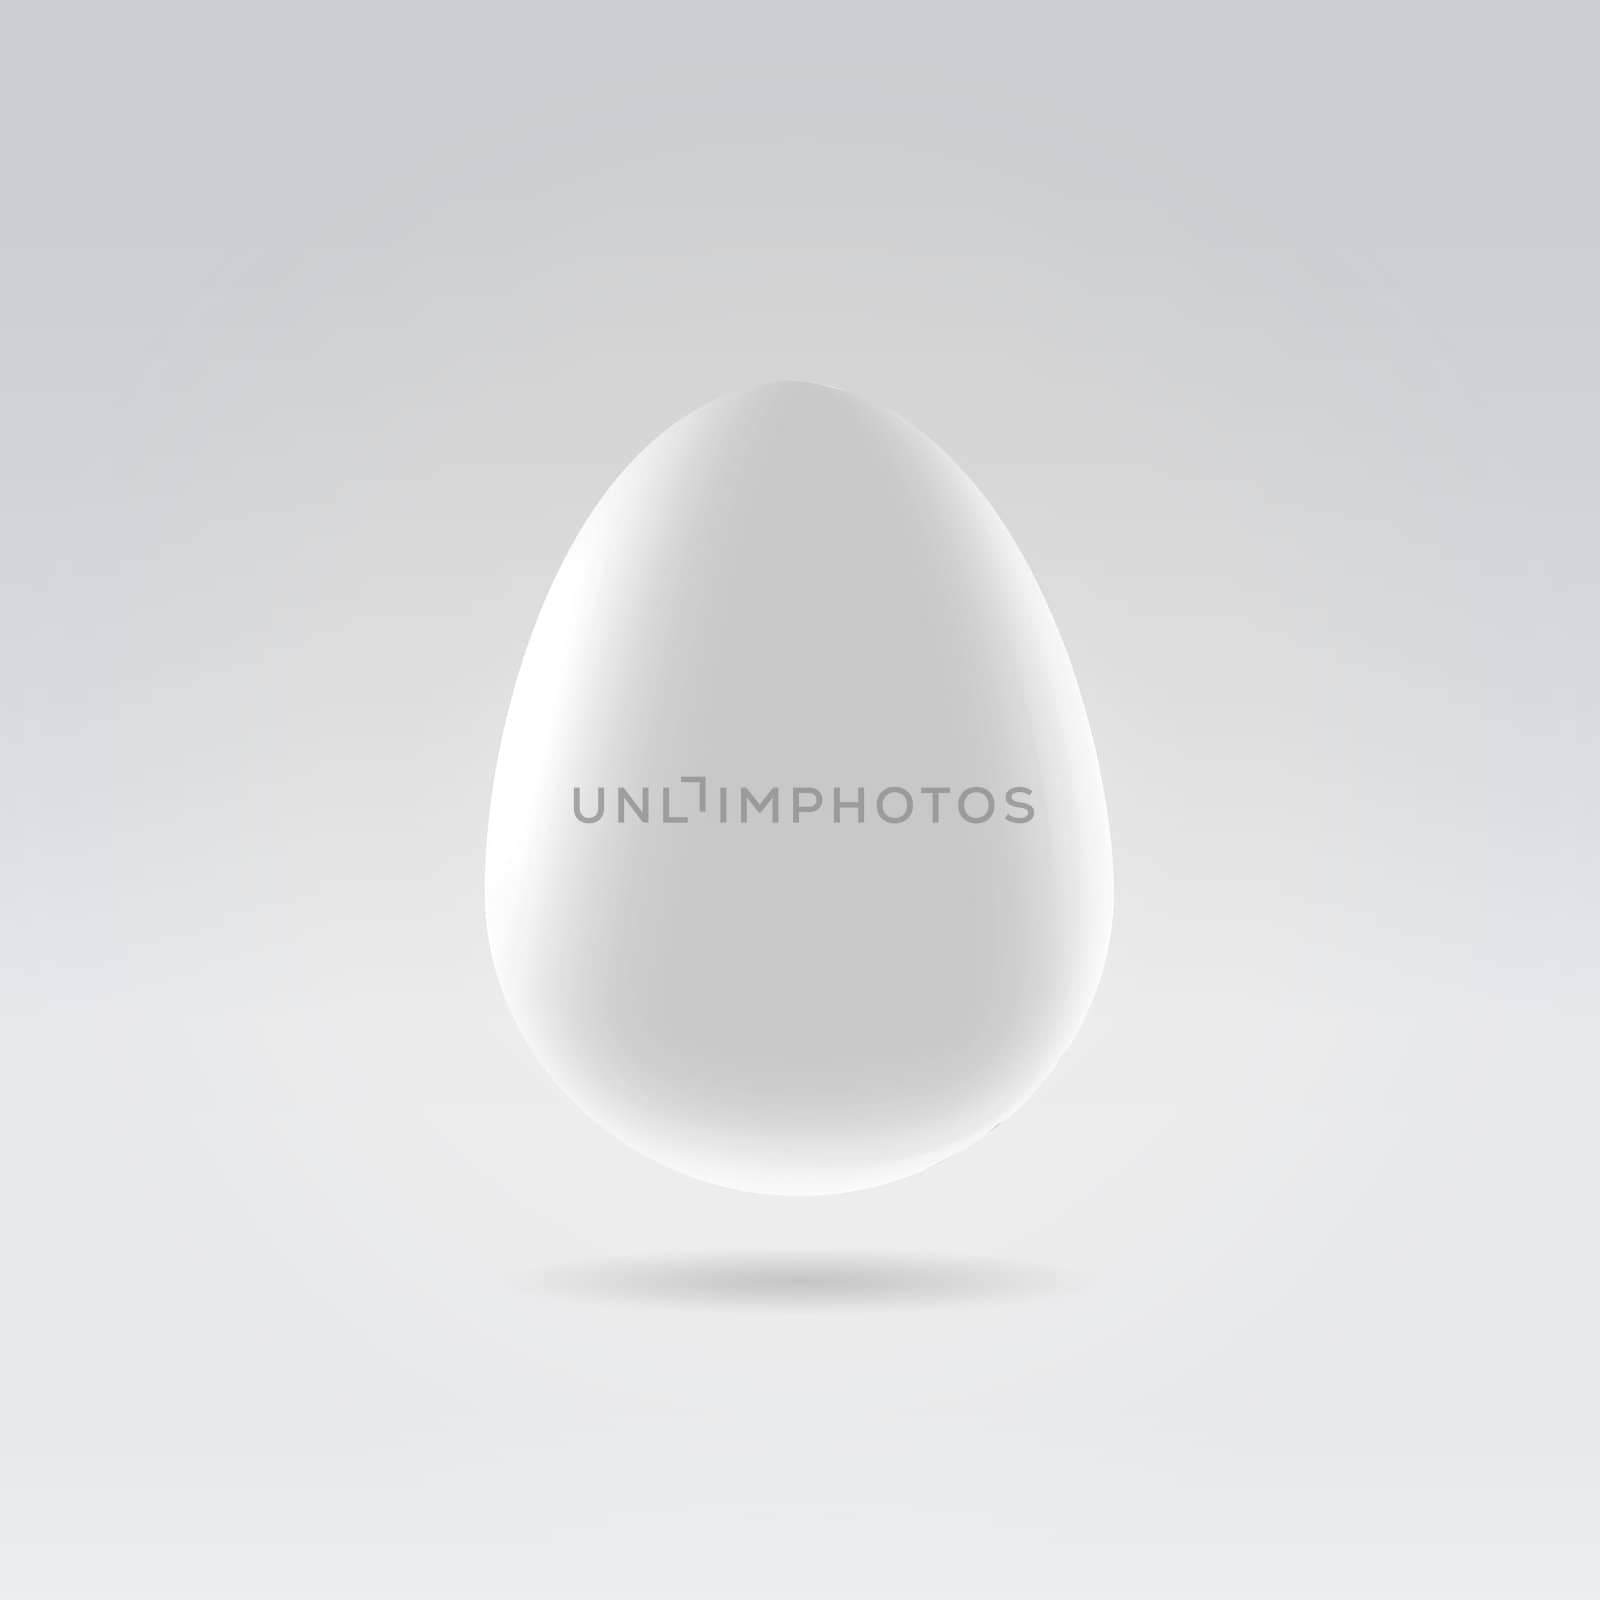 Pure white egg hanging in space by pics4sale